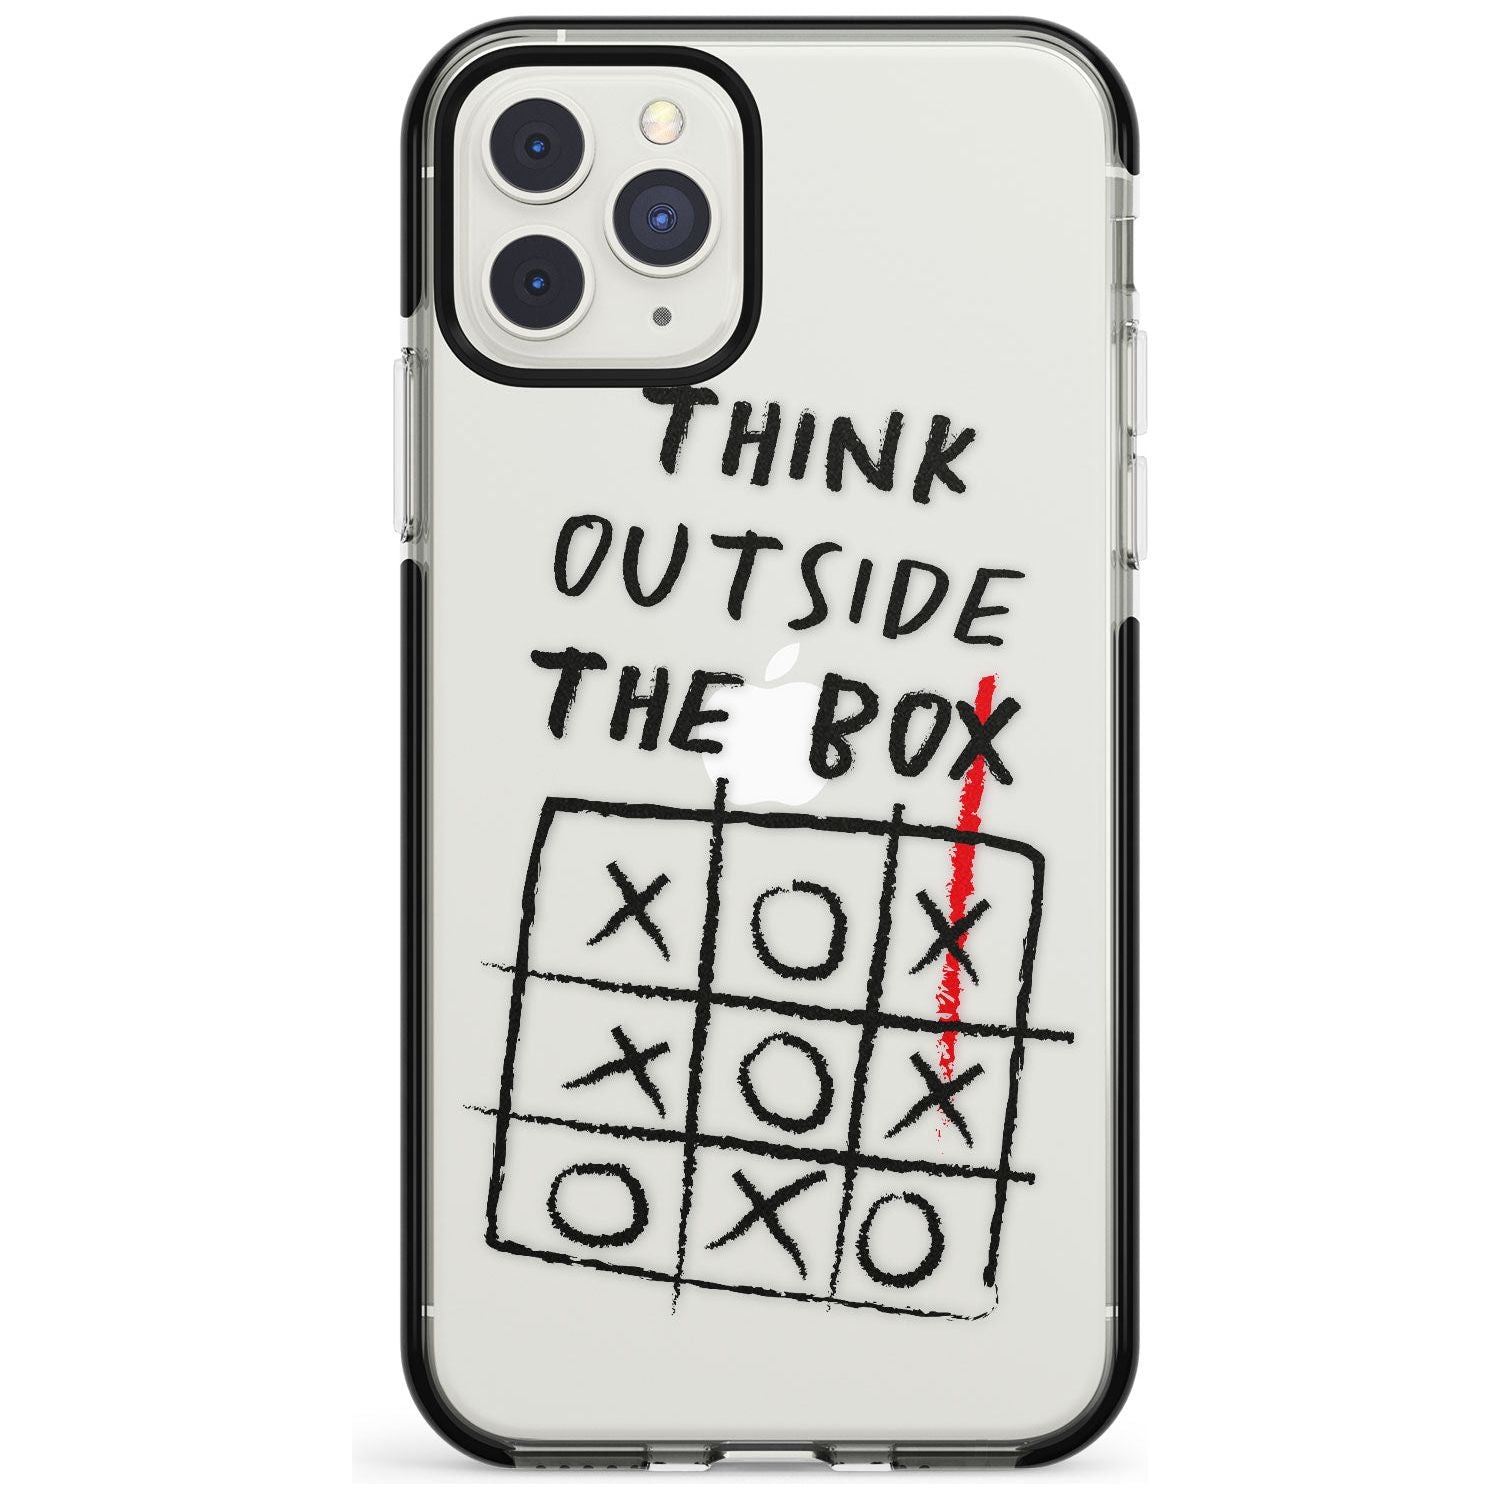 "Think Outside the Box" Black Impact Phone Case for iPhone 11 Pro Max